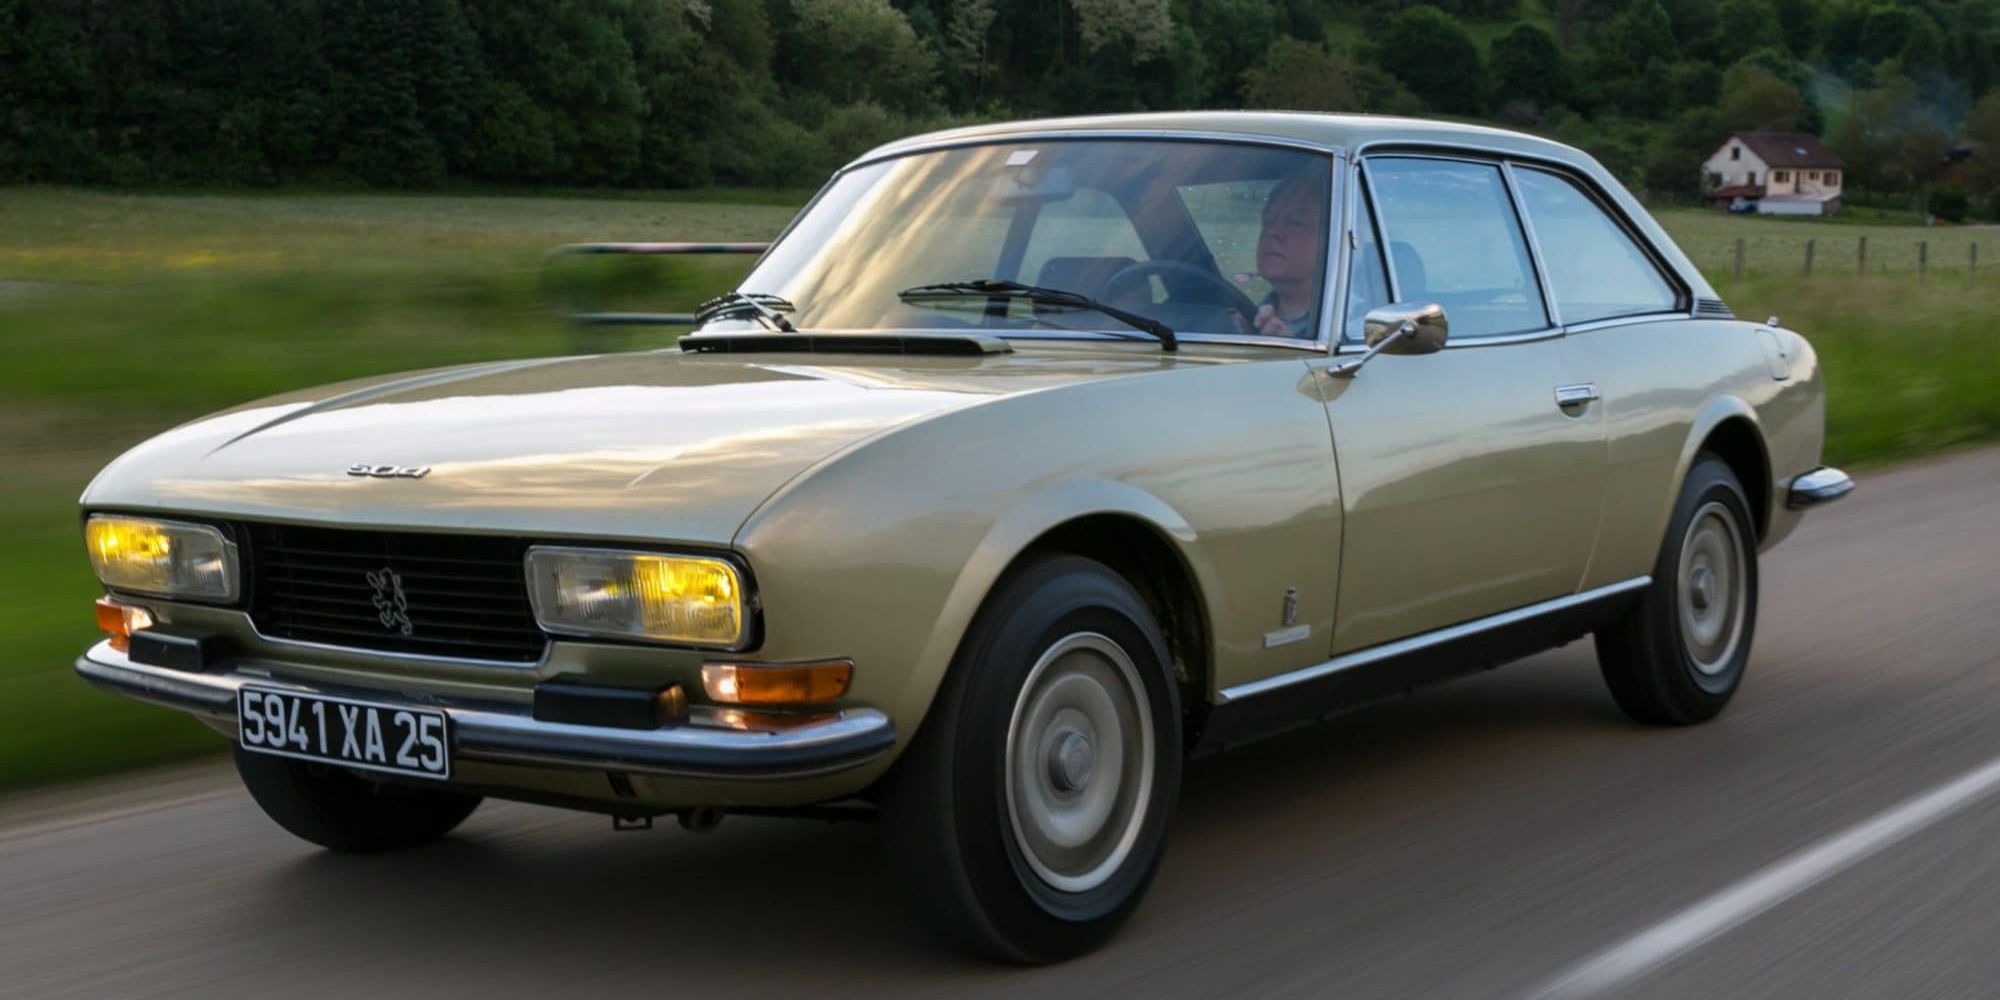 The Peugeot 504 Coupe on the move